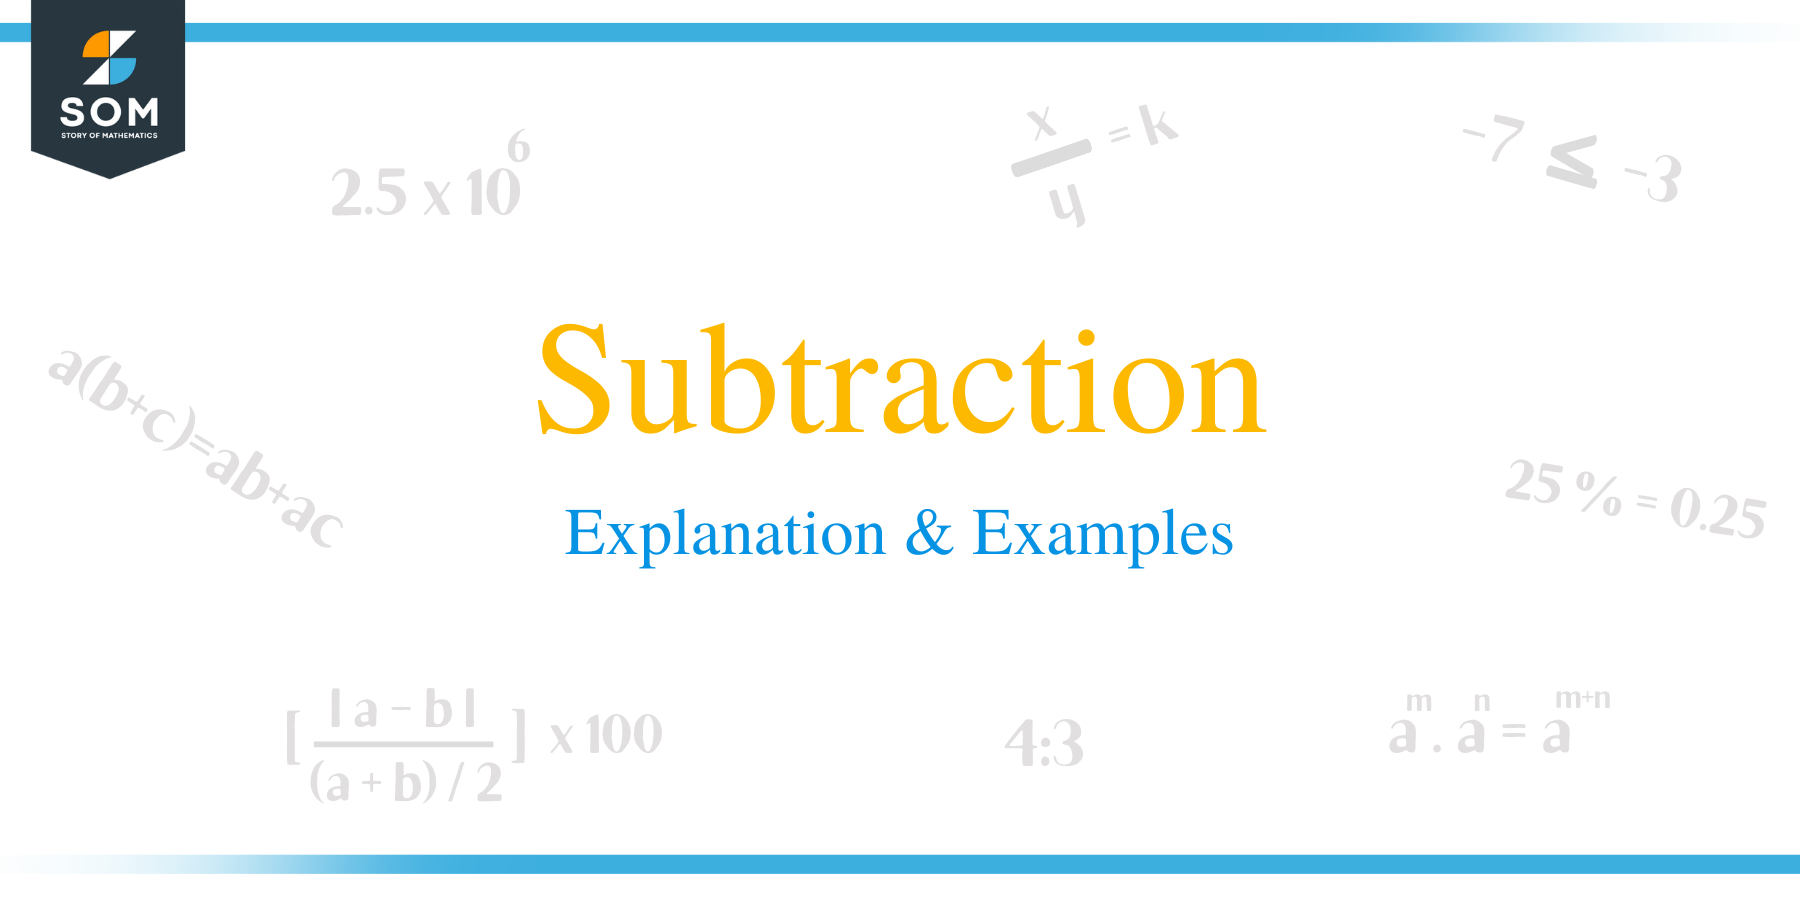 What is Subtraction